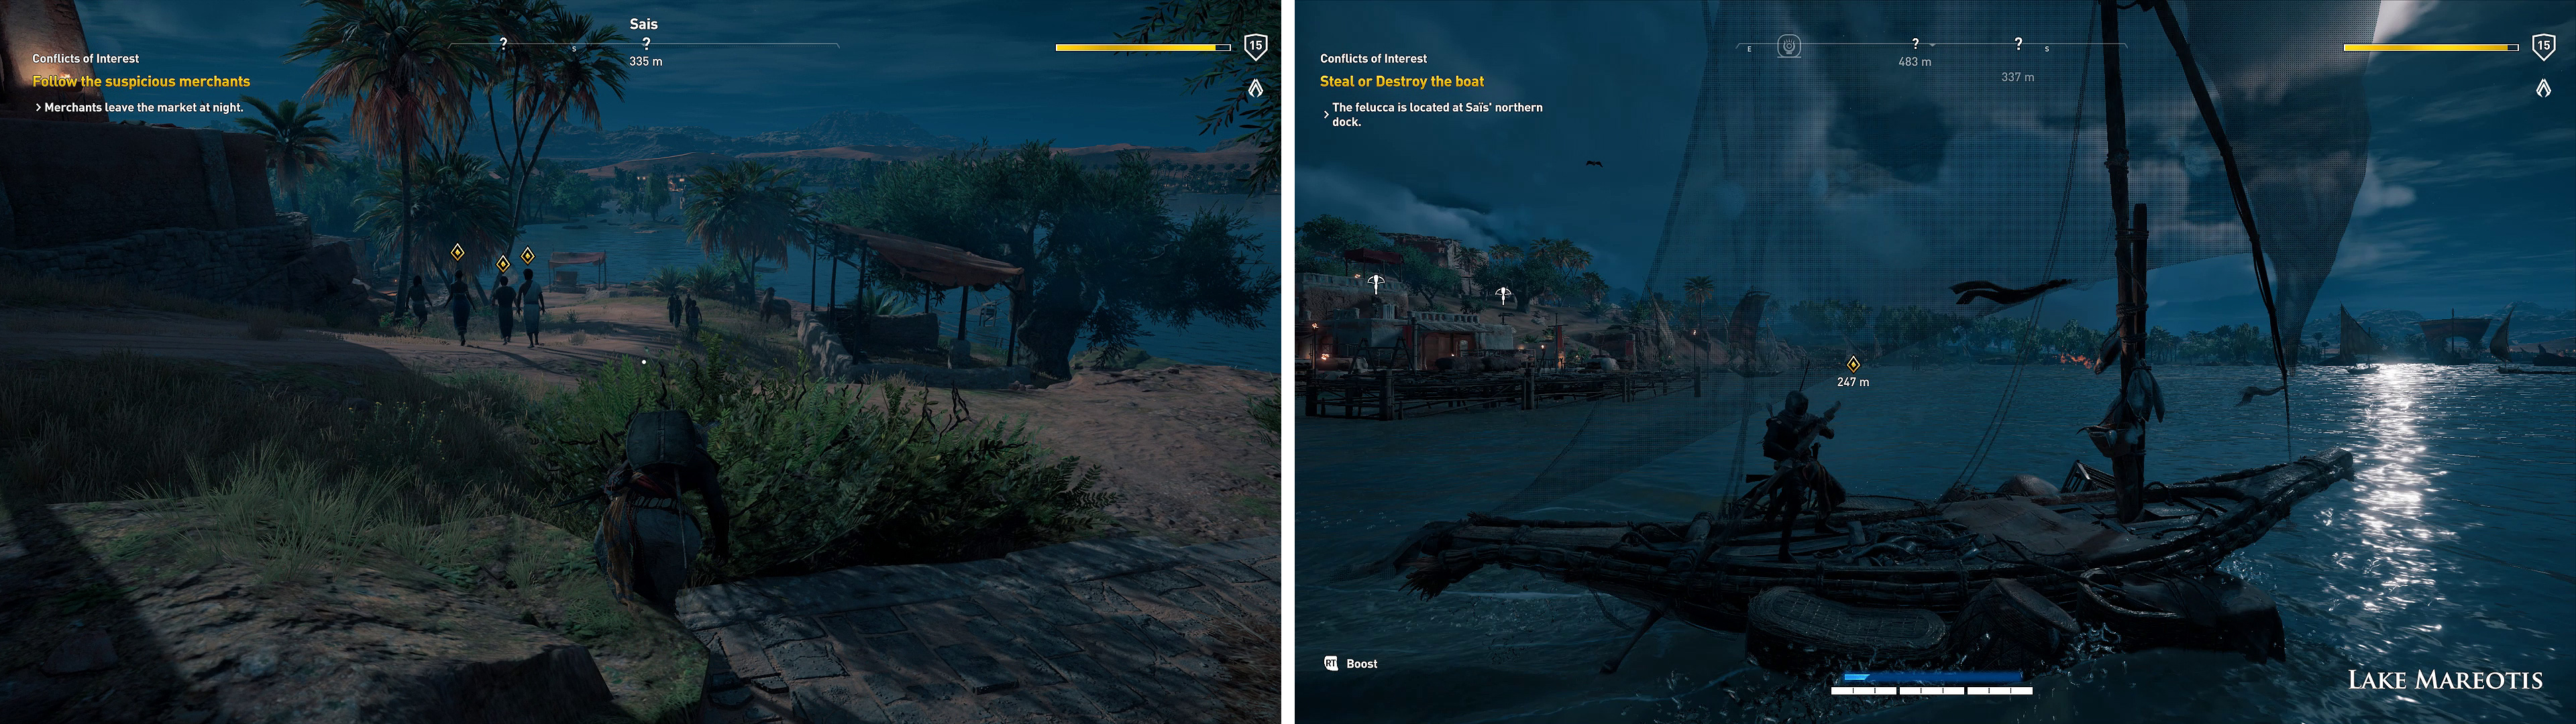 Follow the merchants at night (left) then after the scenes, head to the fort. You can either destroy or steal the felucca (right).